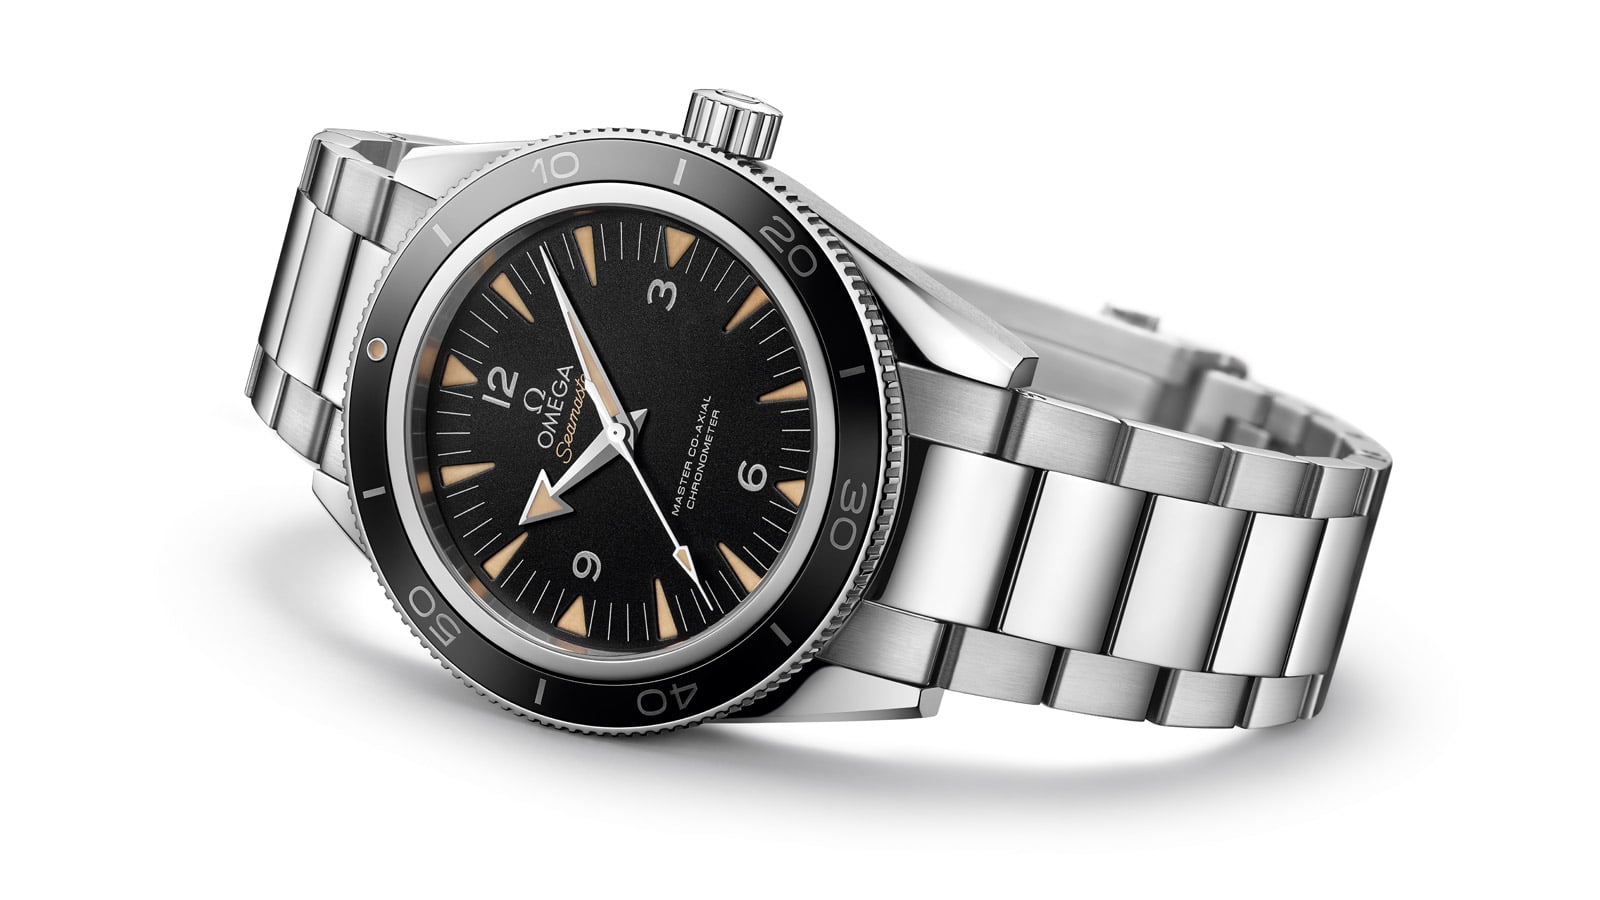 Omega Seamaster 300: It tells the time